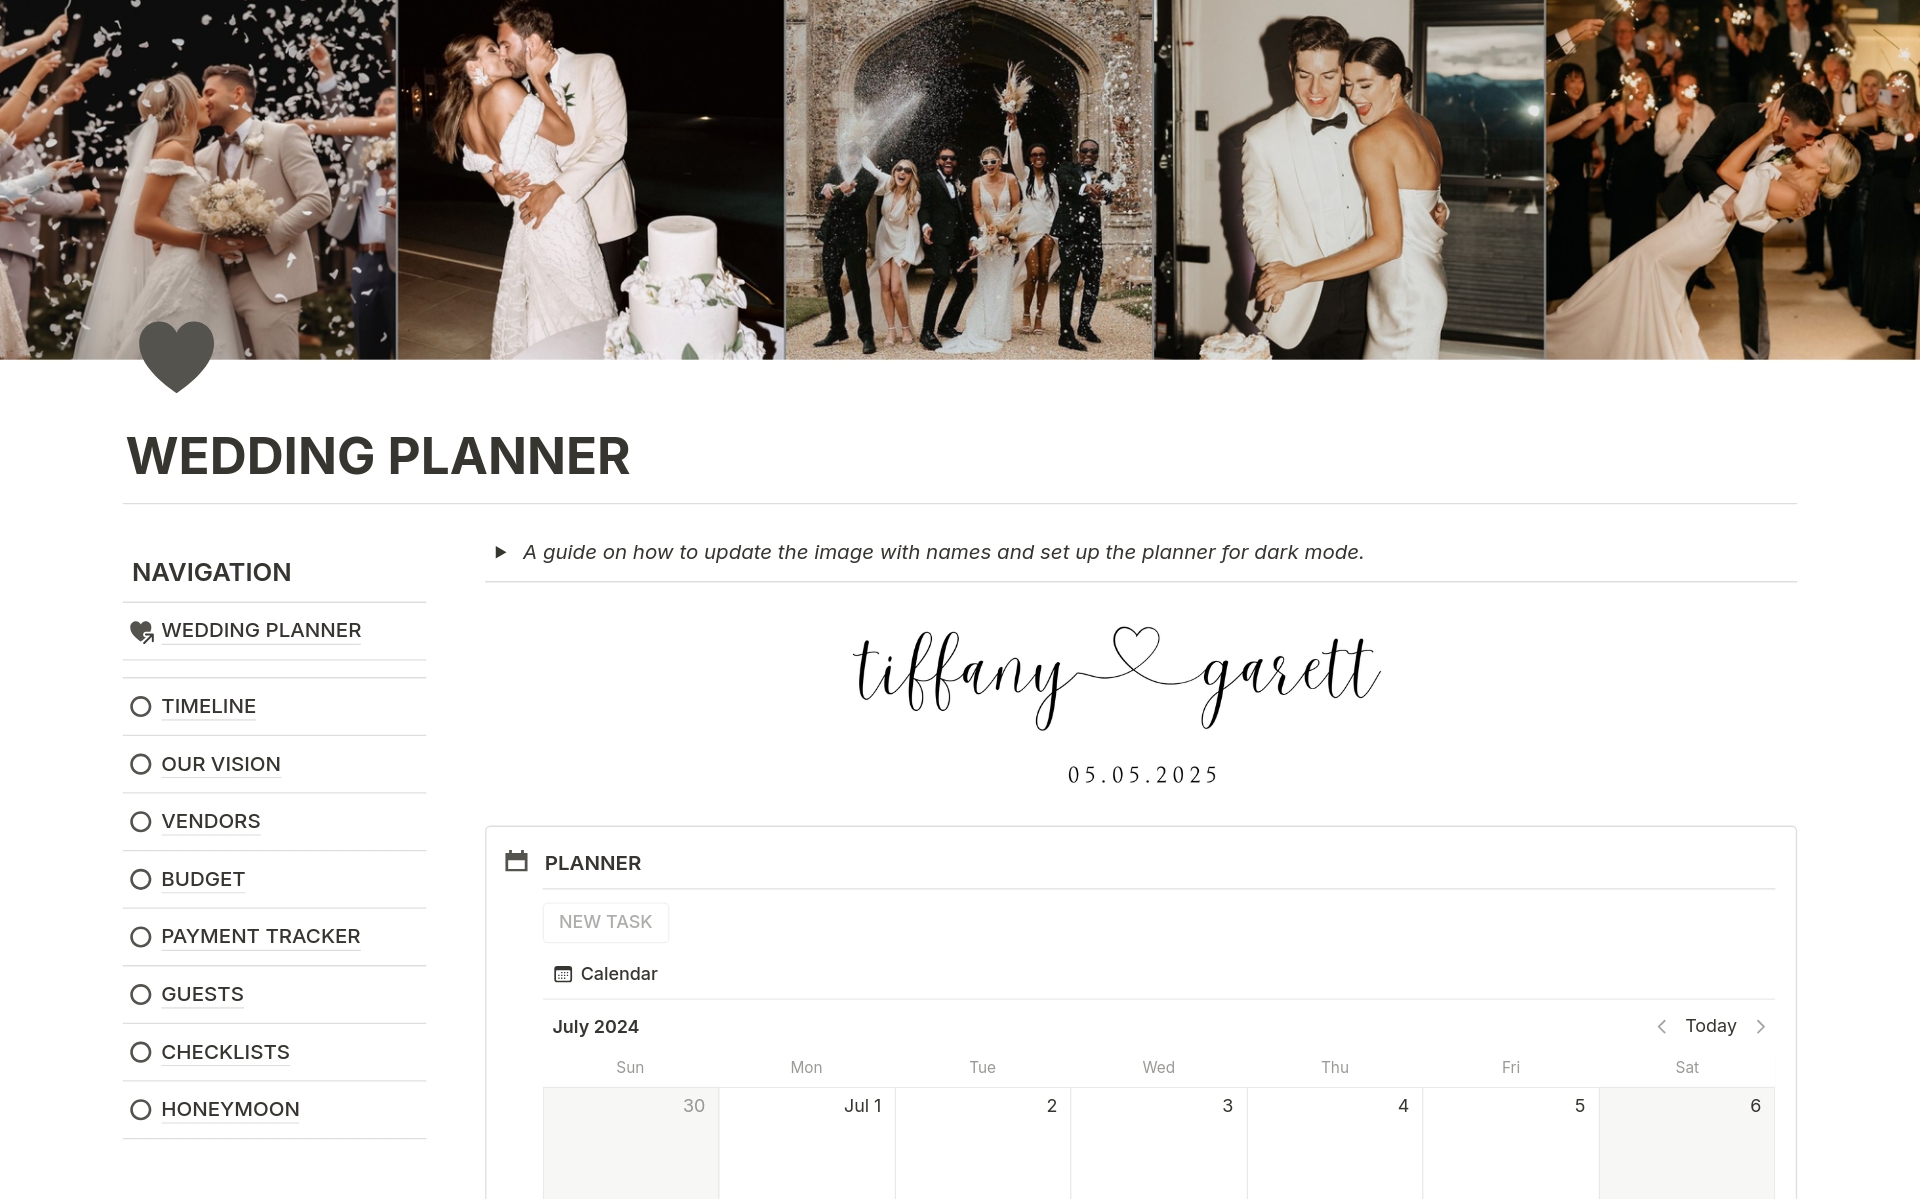 A template preview for The Ultimate Wedding Planner